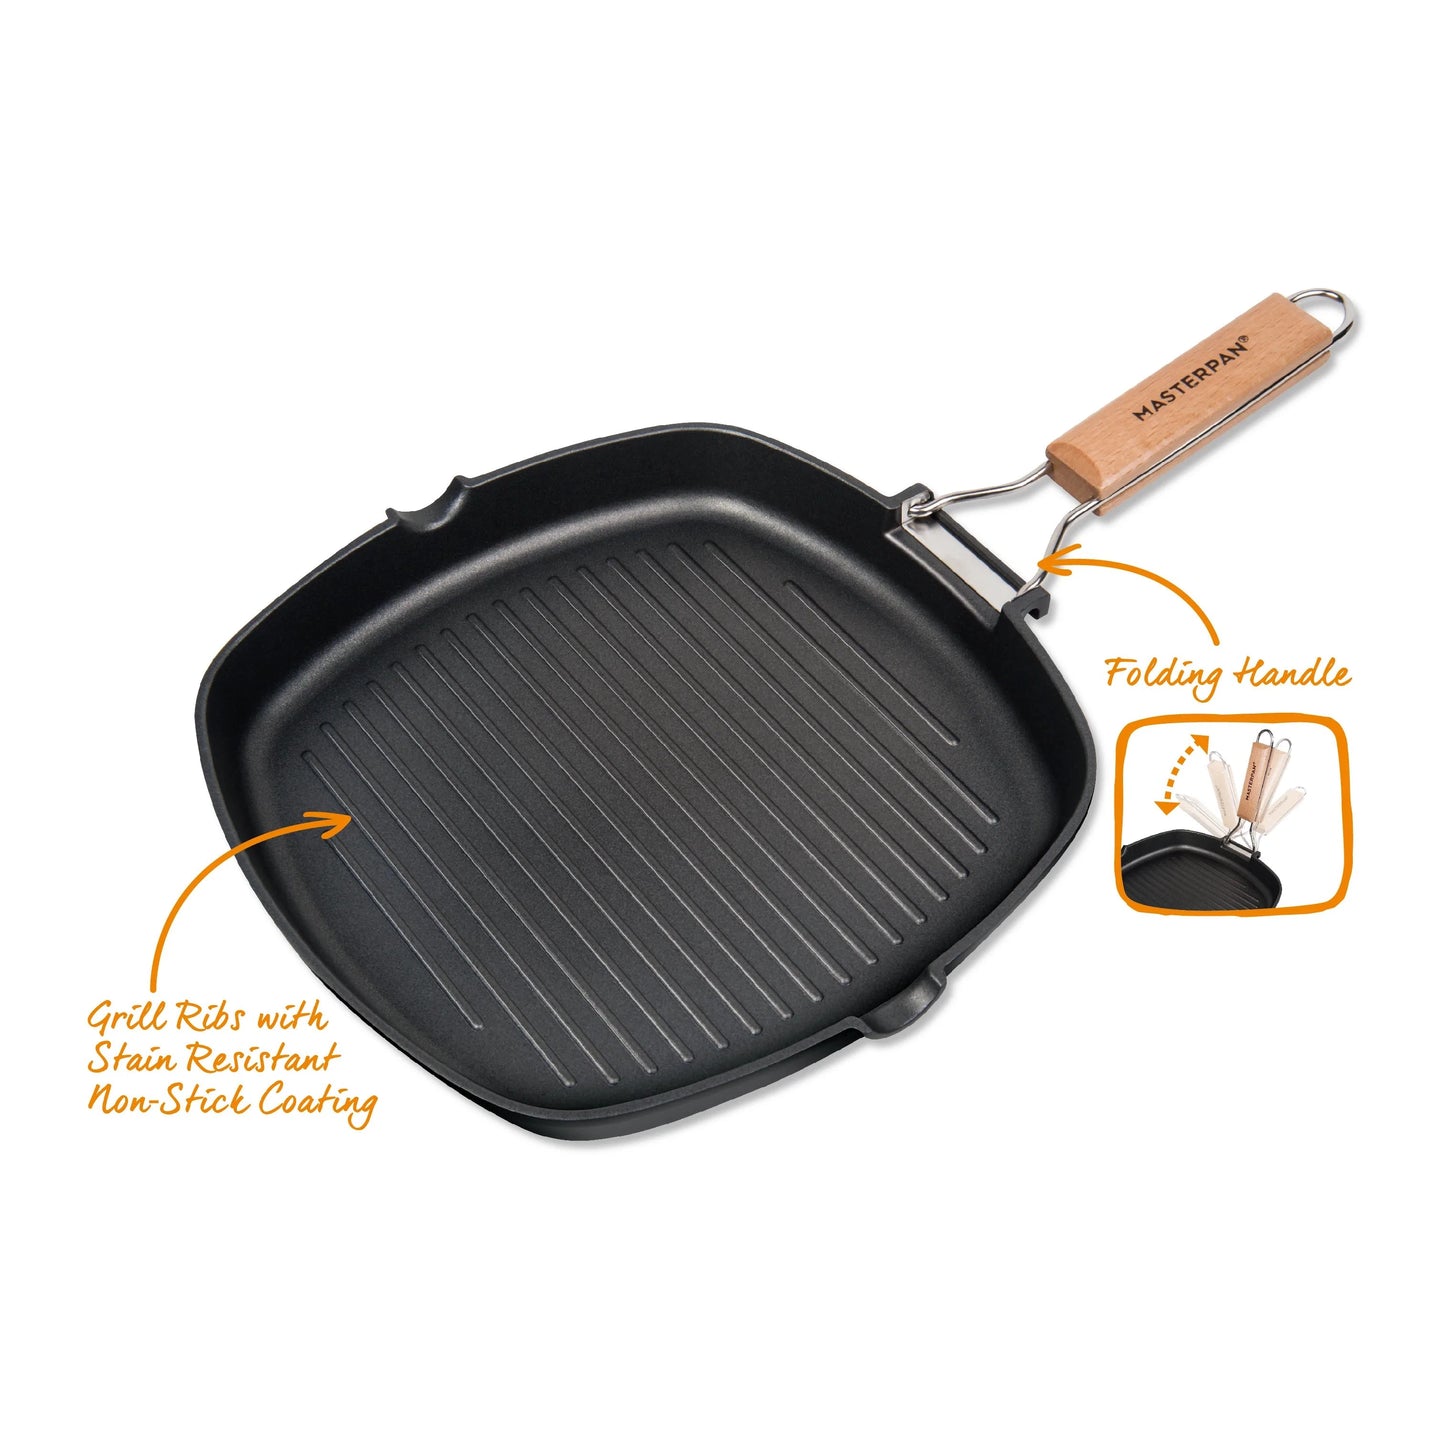 MASTERPAN Classico Series 11” Grill Pan Non-stick Cast Aluminum With Folding Handle